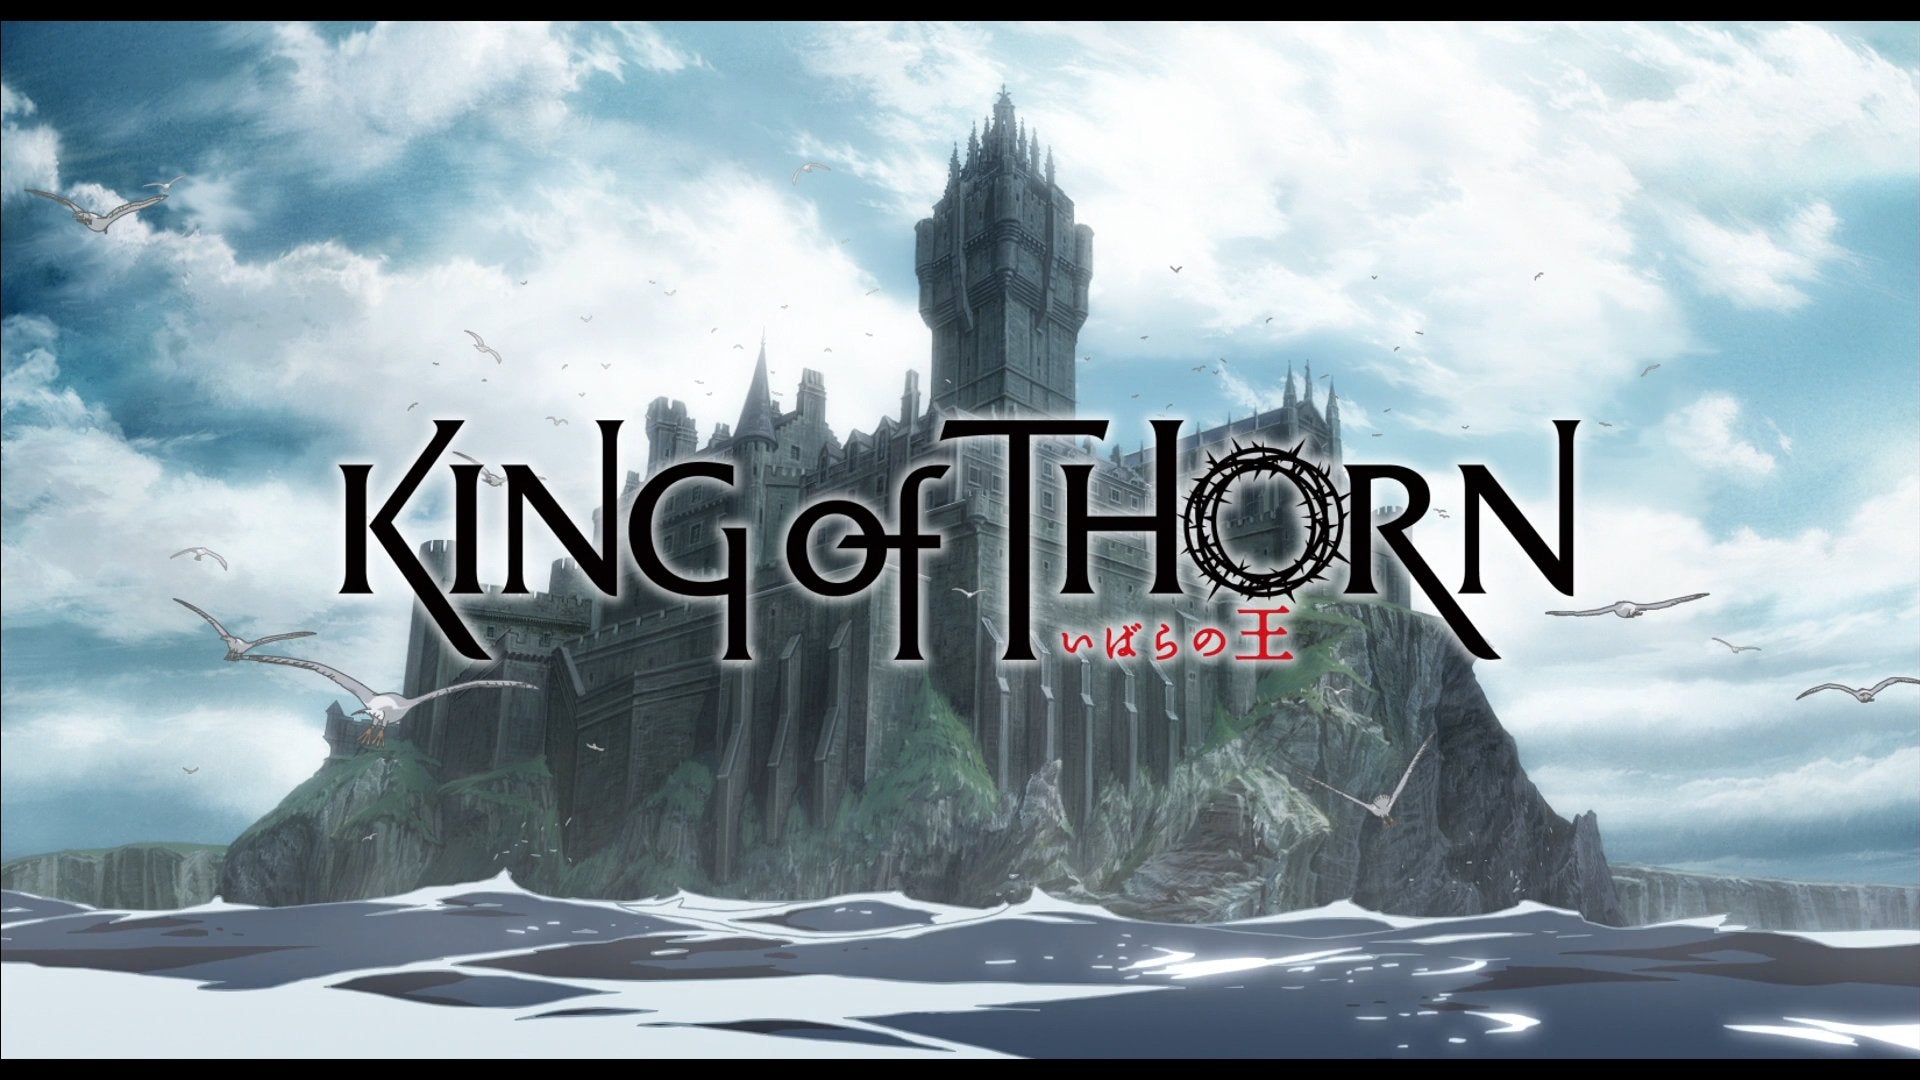 Imagination is Our Greatest Gift and Curse: review of 'King of Thorn' |  Canne's anime review blog